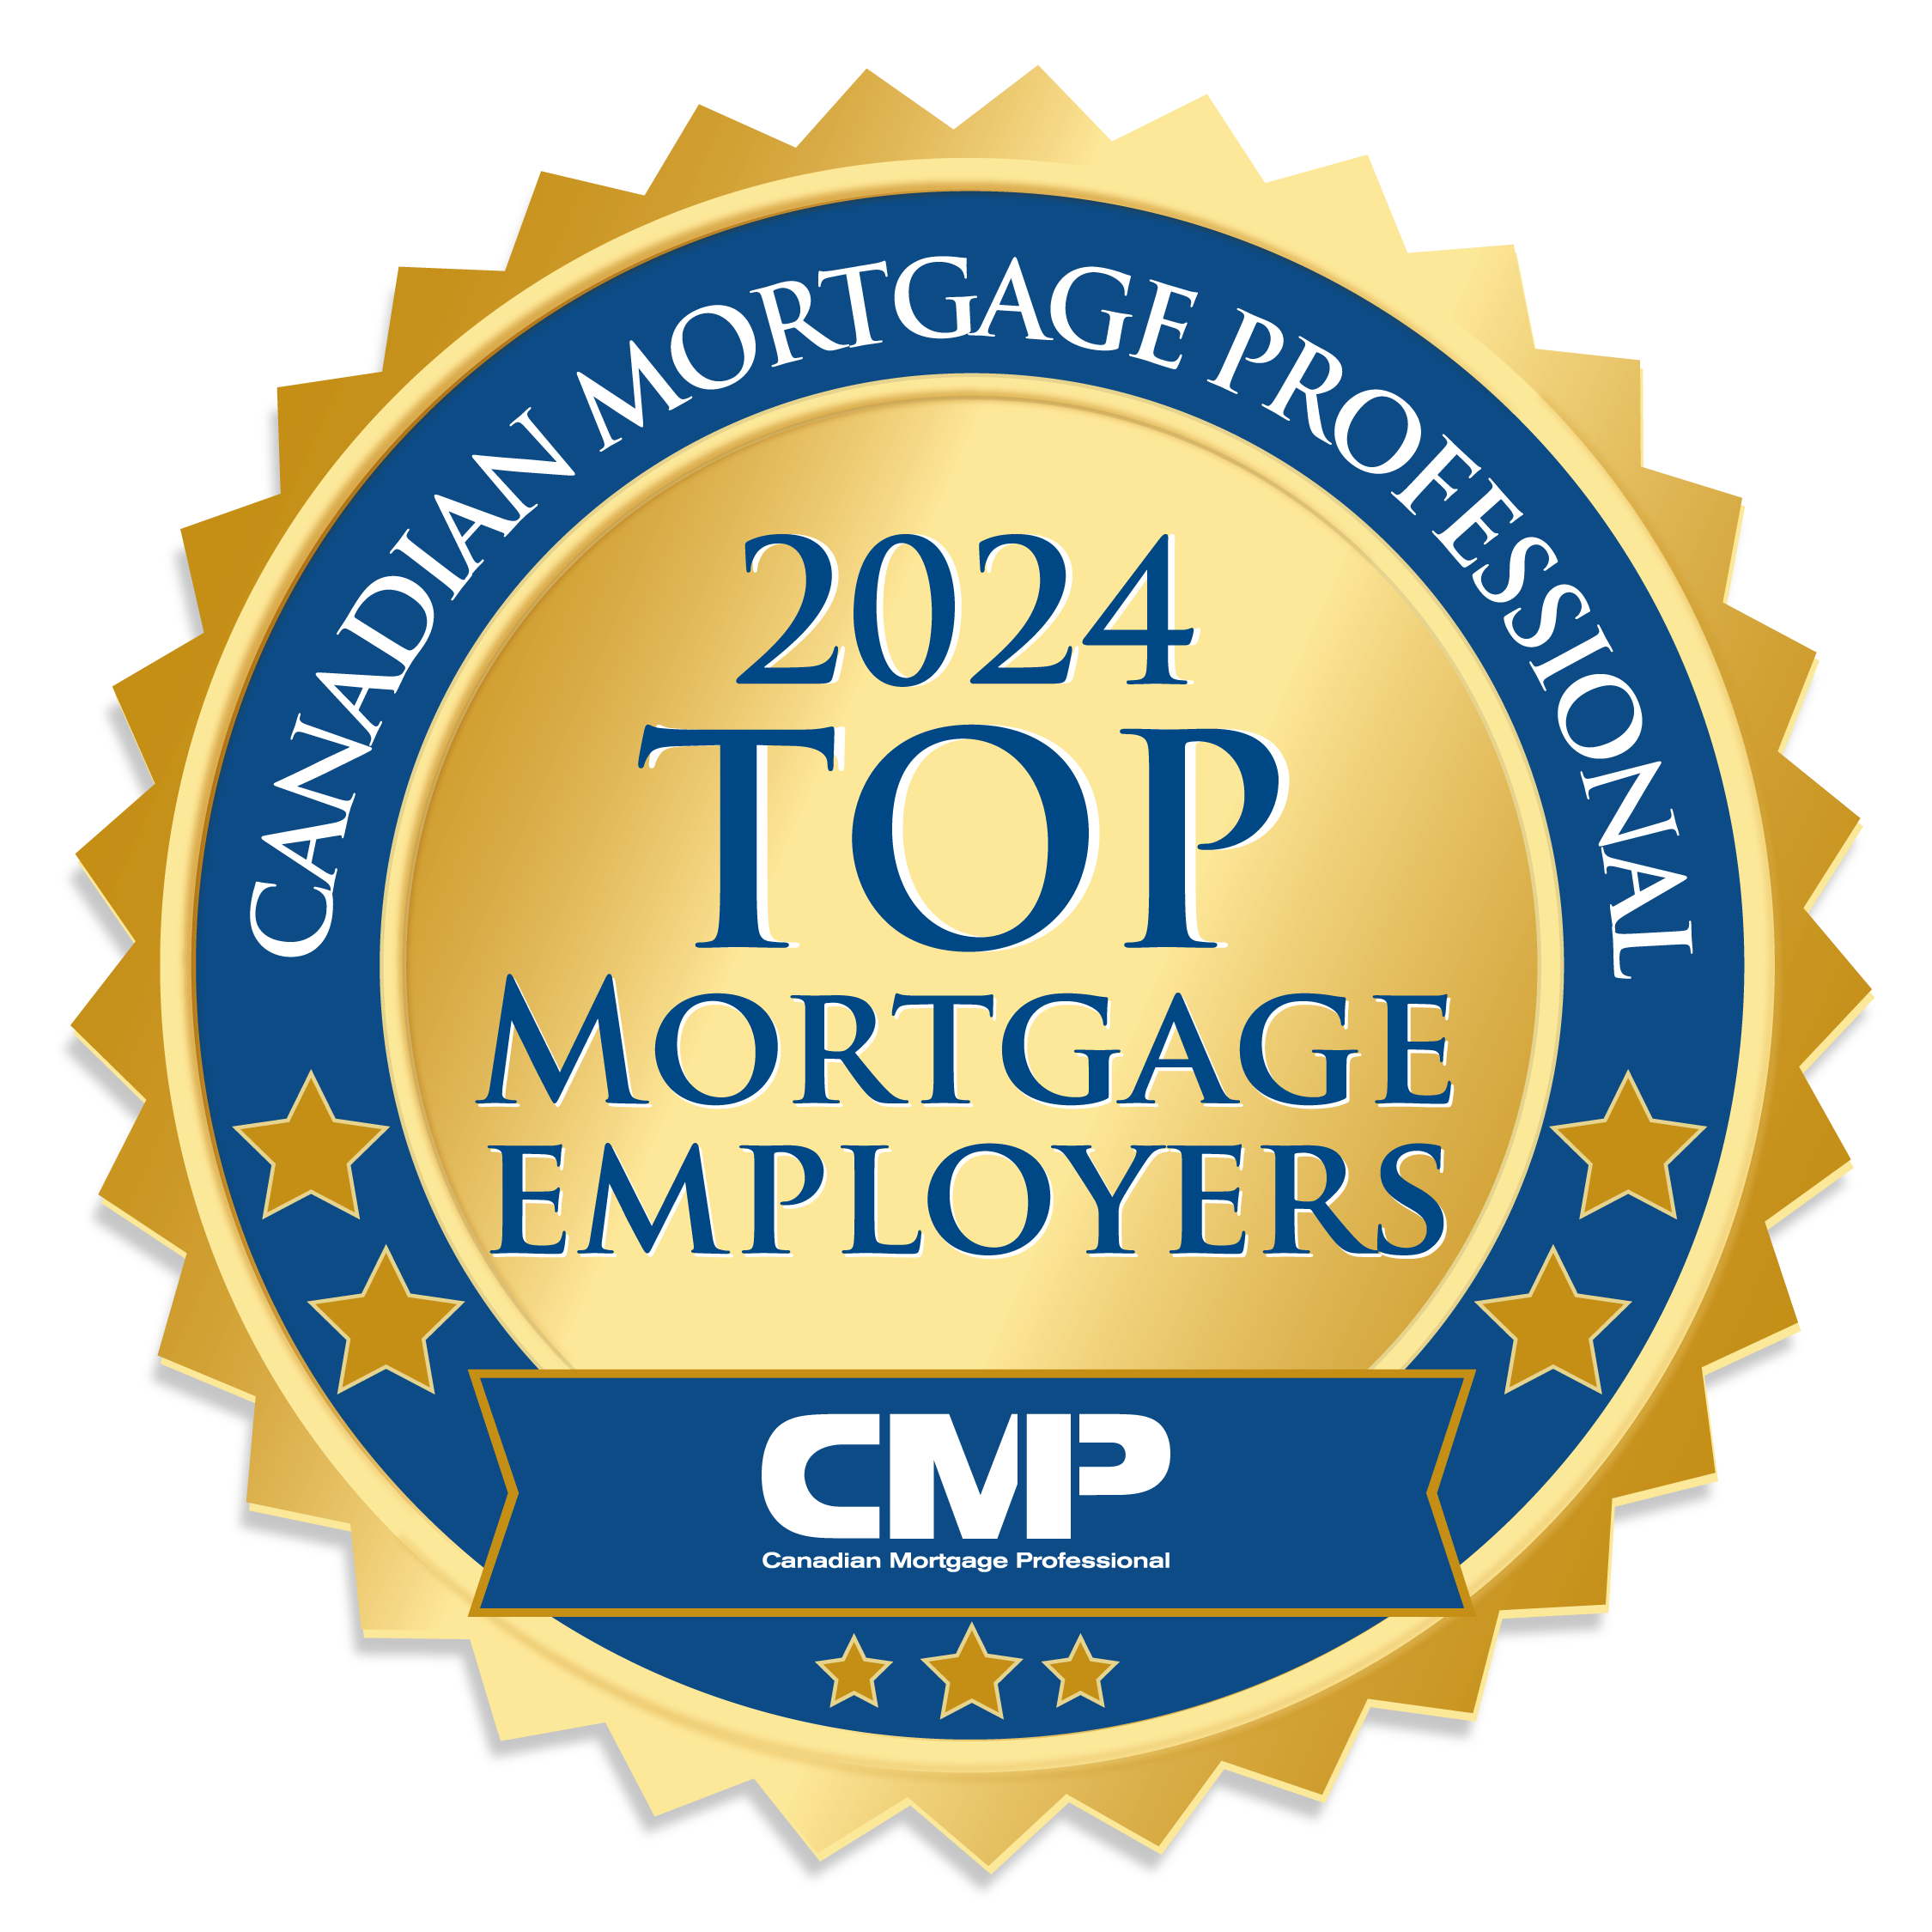 Top Mortgage Employers 2024 